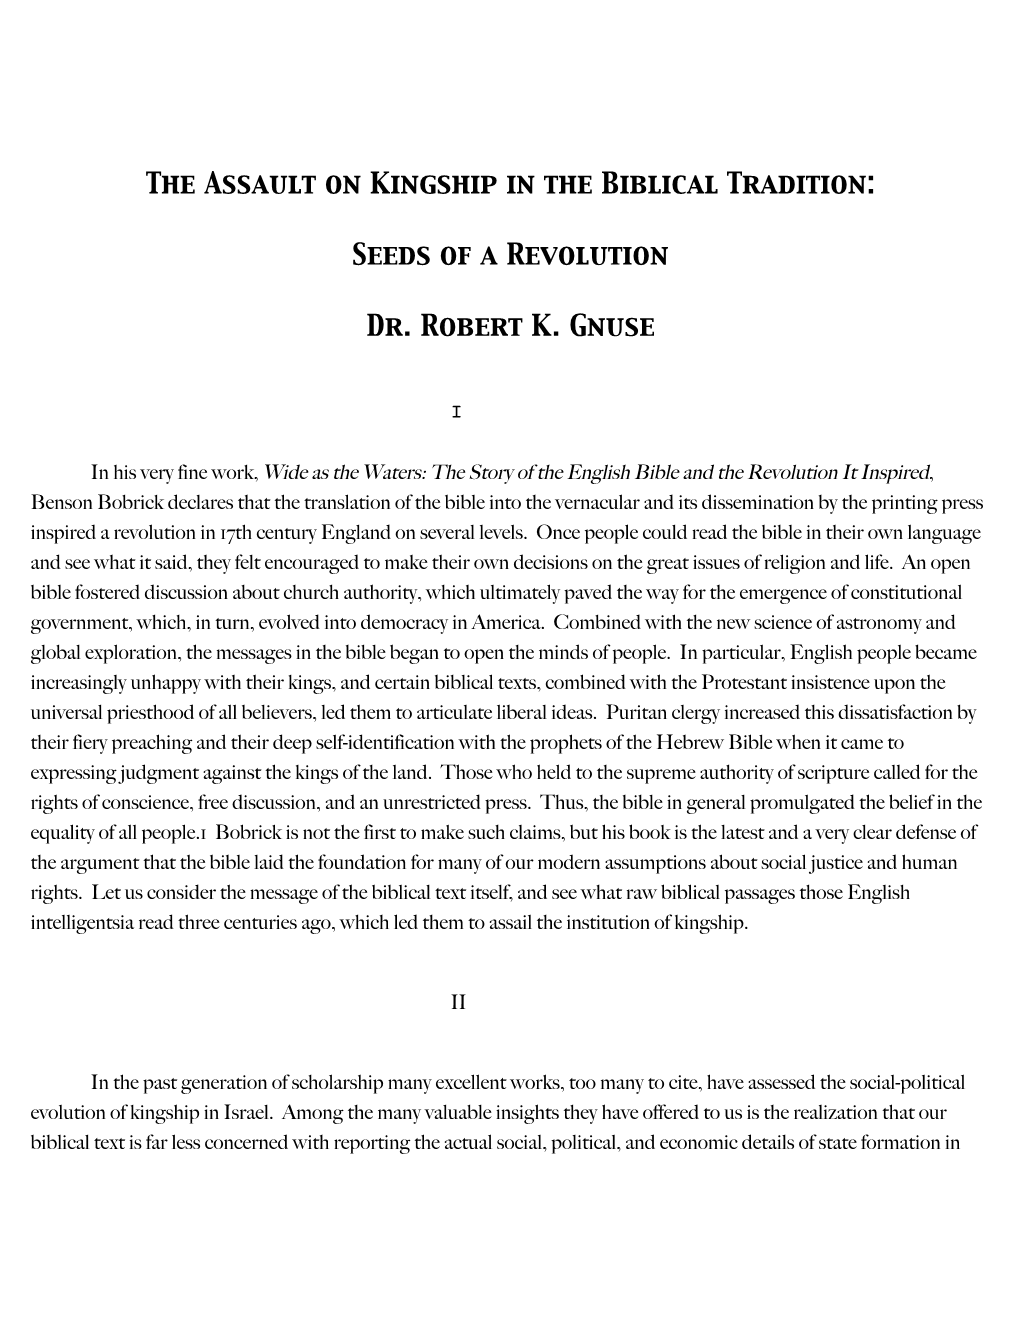 The Assault on Kingship in the Biblical Tradition: Seeds of a Revolution Dr. Robert K. Gnuse